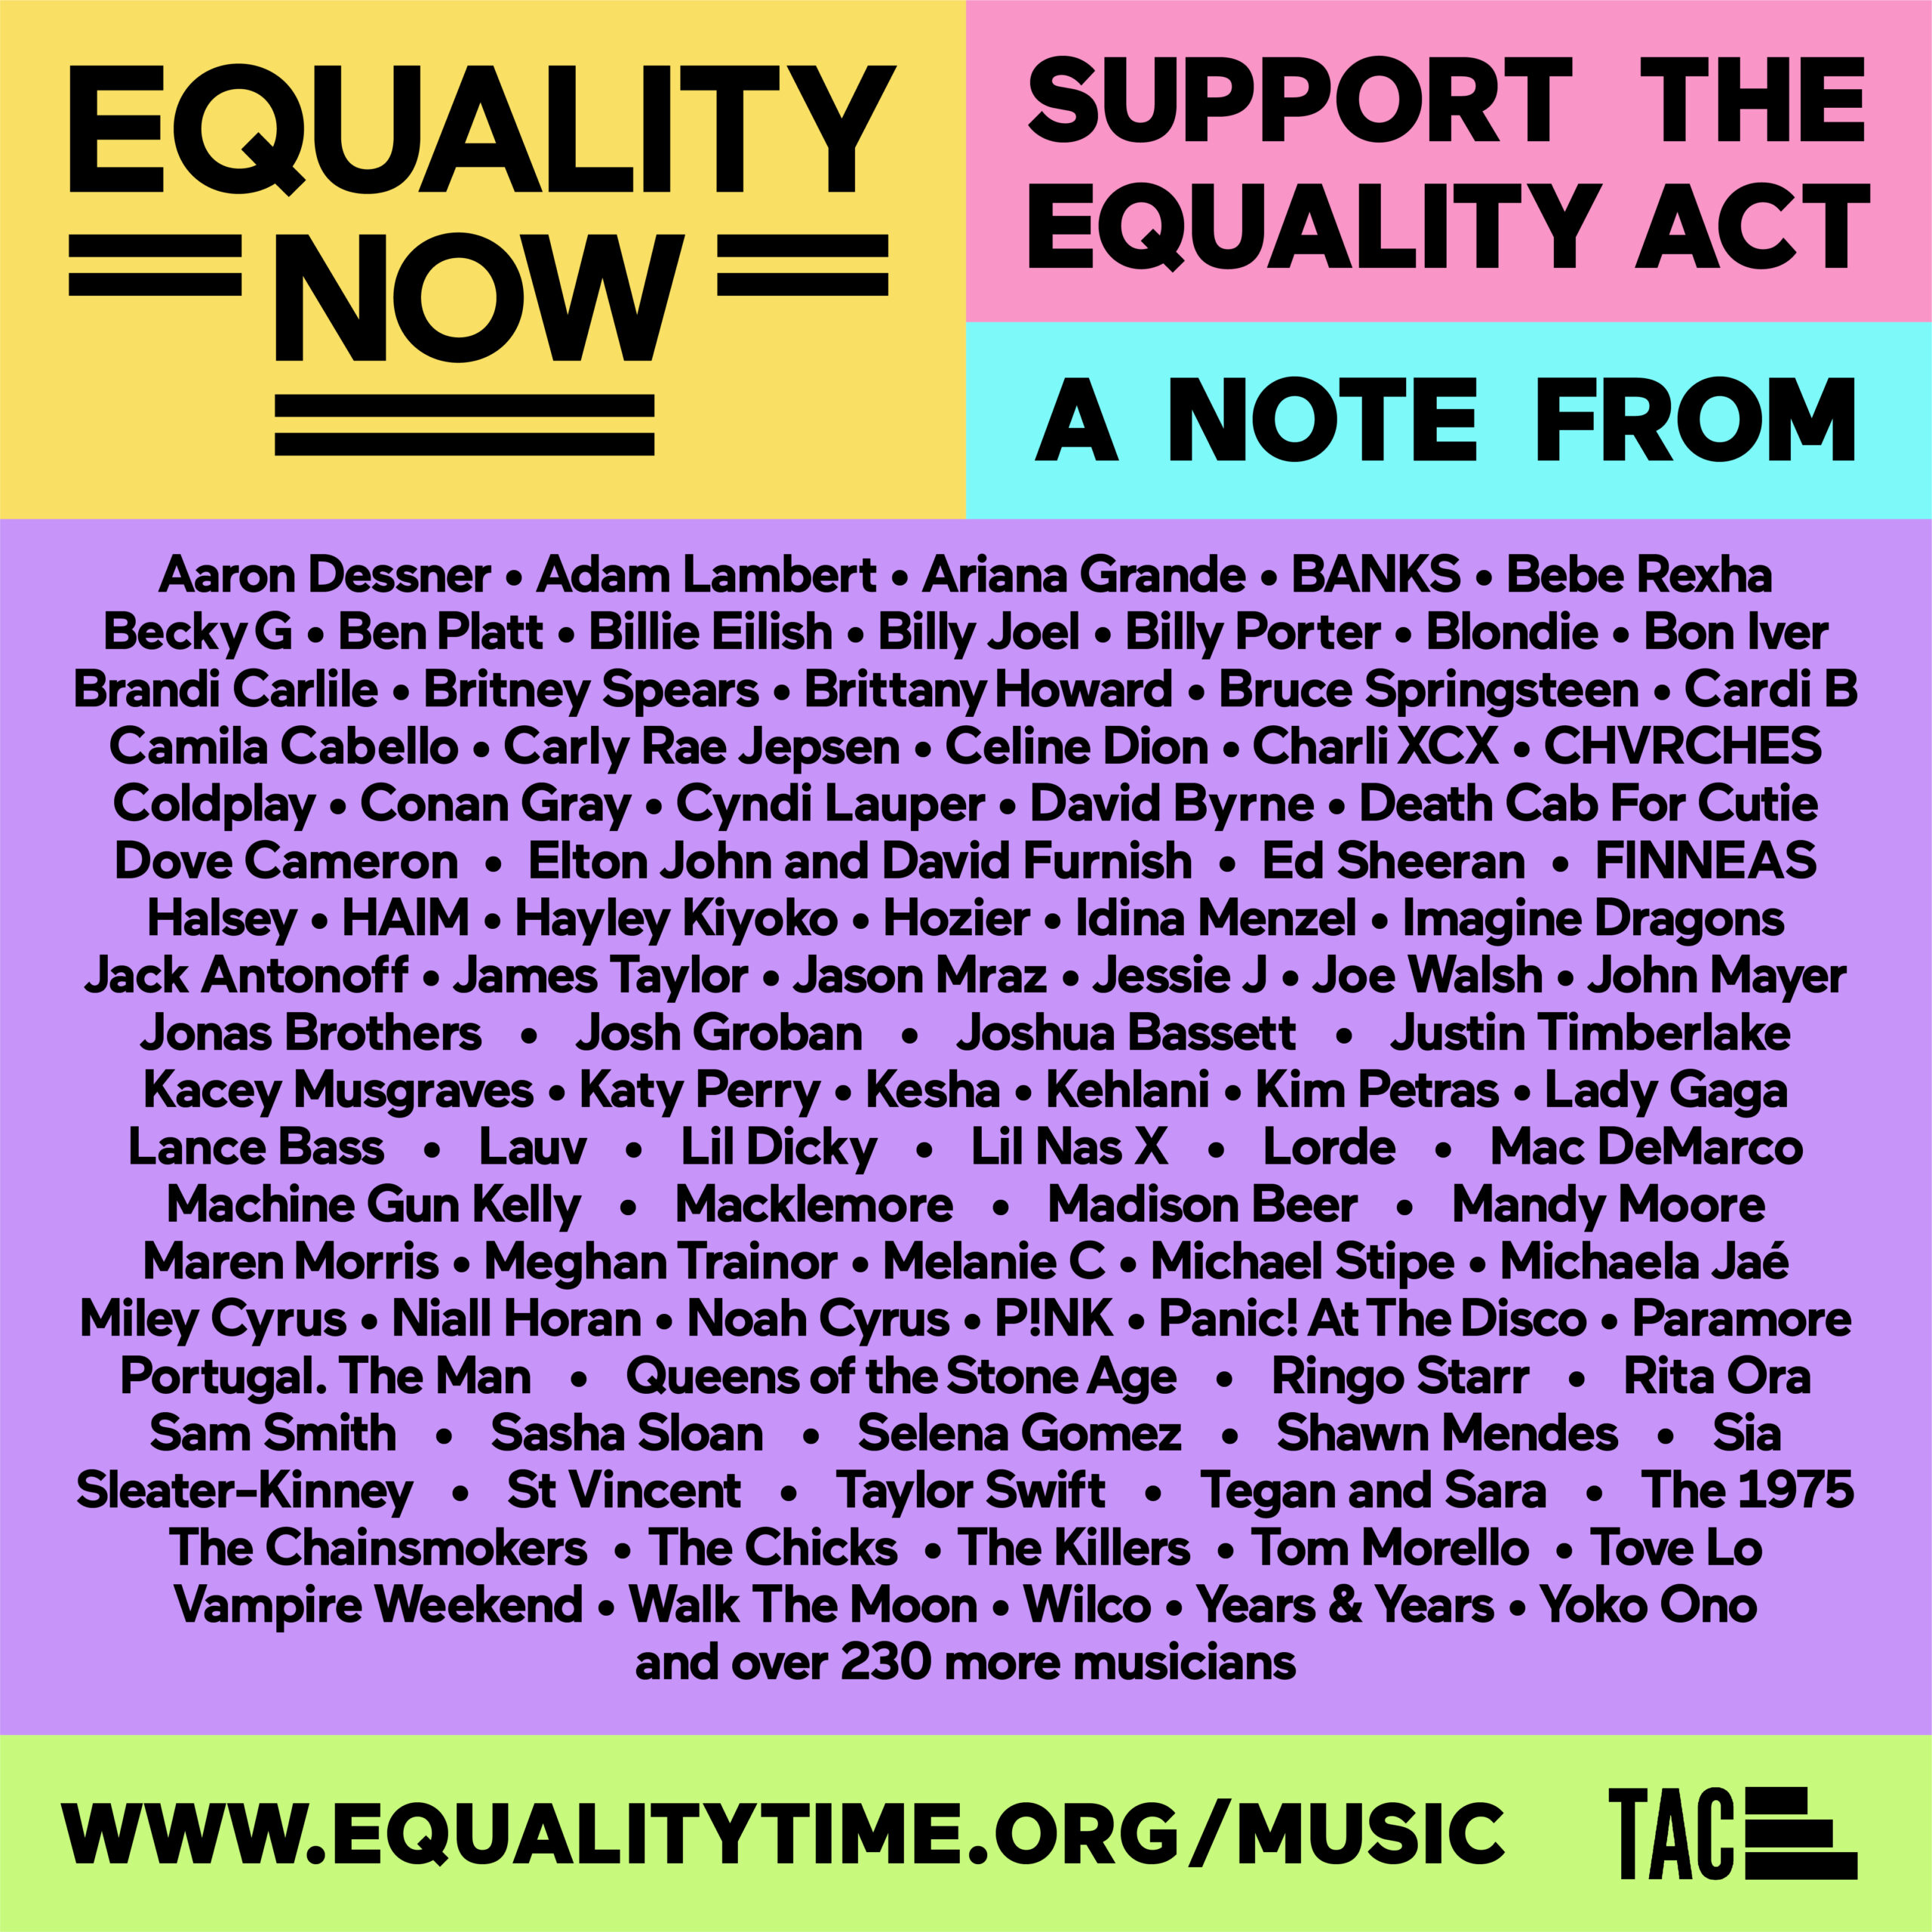 Artists in Support of The Equality Act